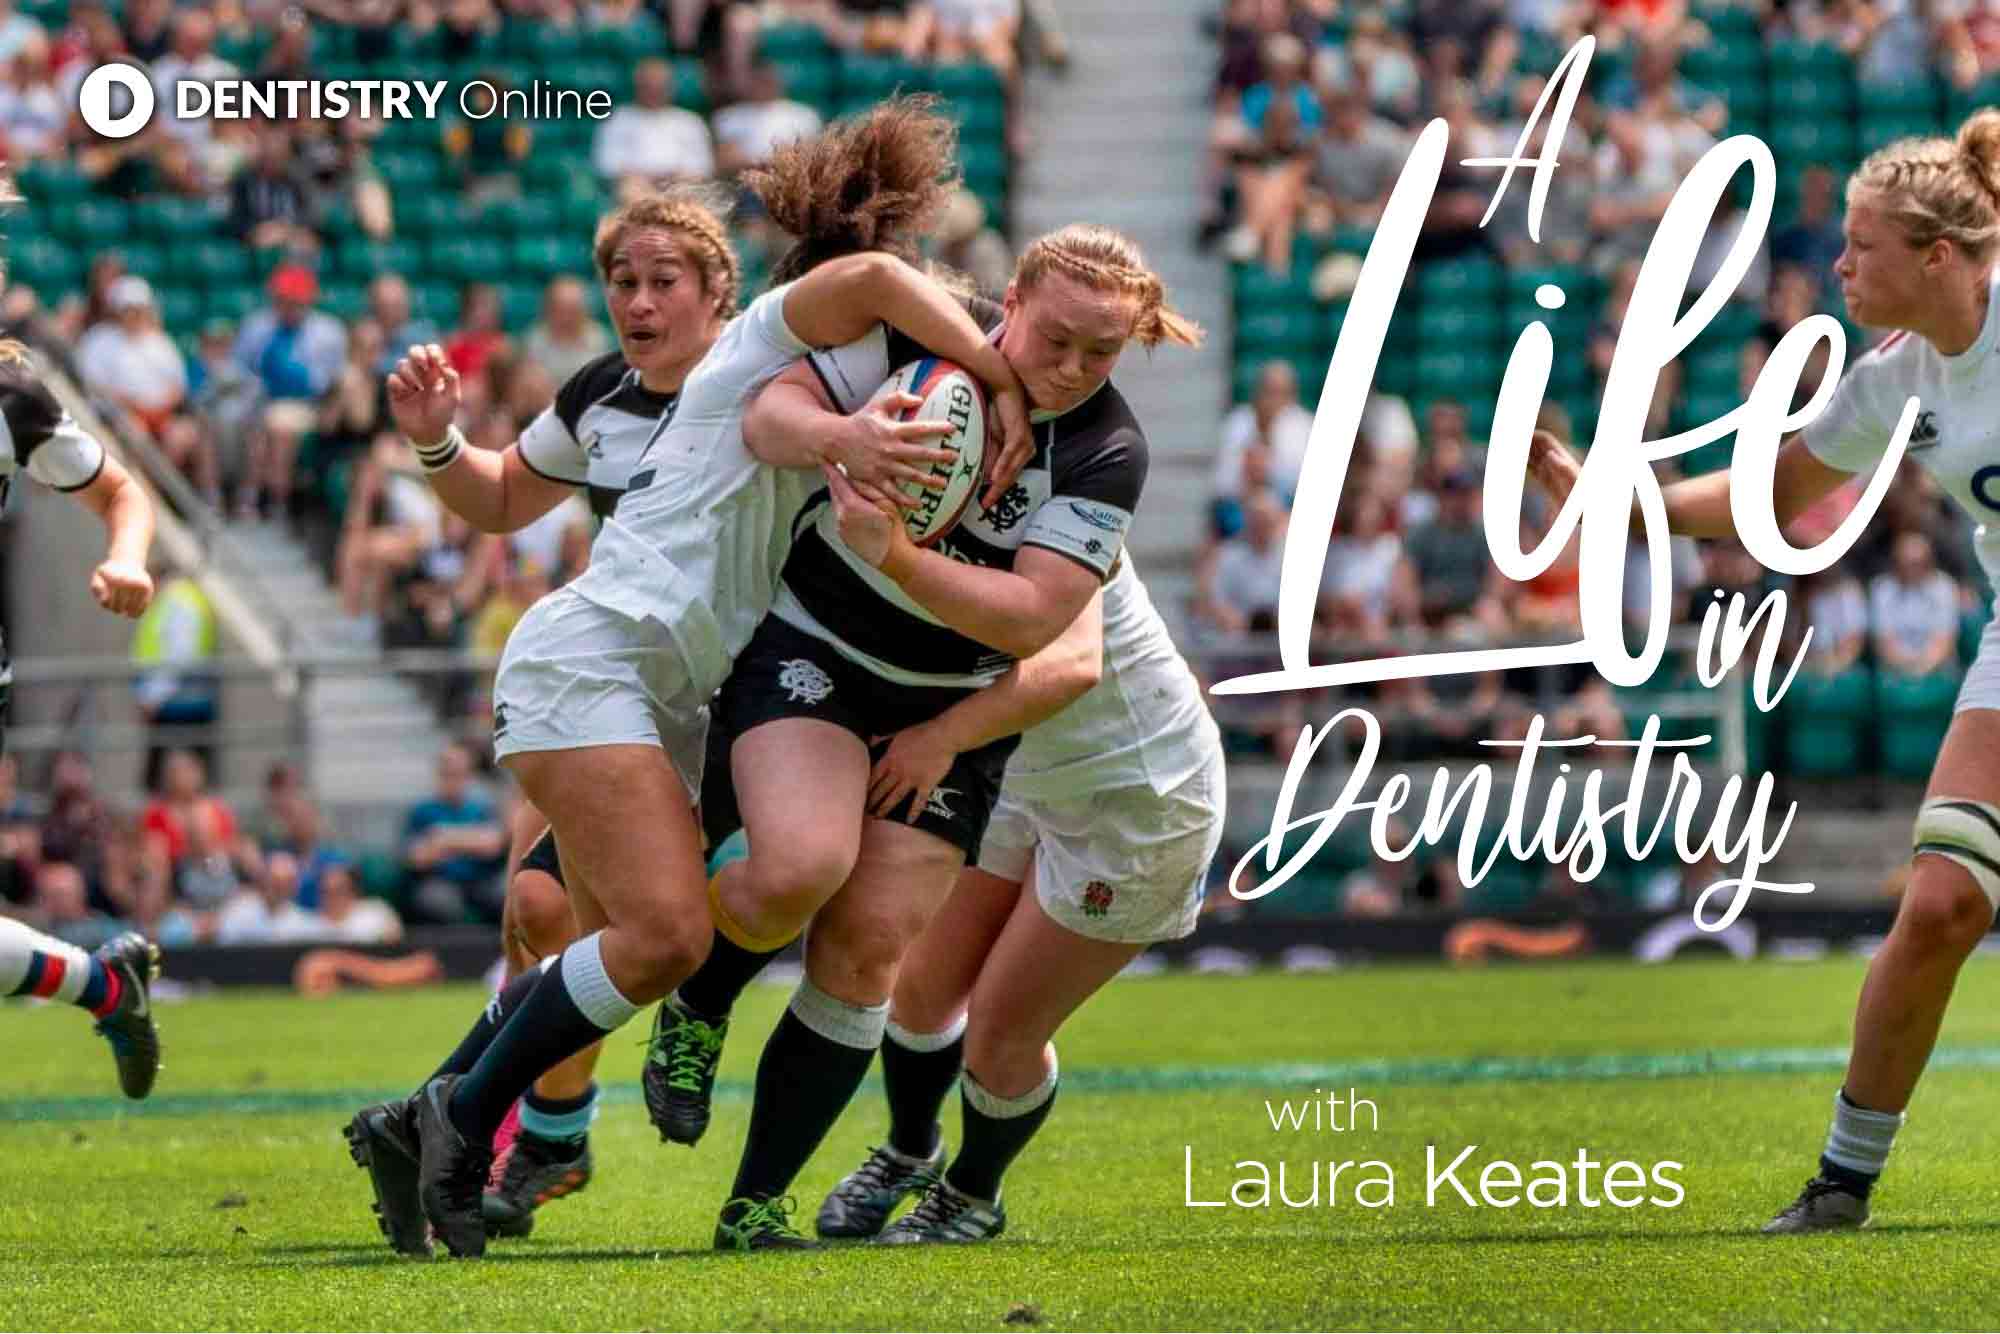 Worcester Warriors player and 2014 World Cup winner Laura Keates talks to Dentistry Online about balancing her dental degree with rugby